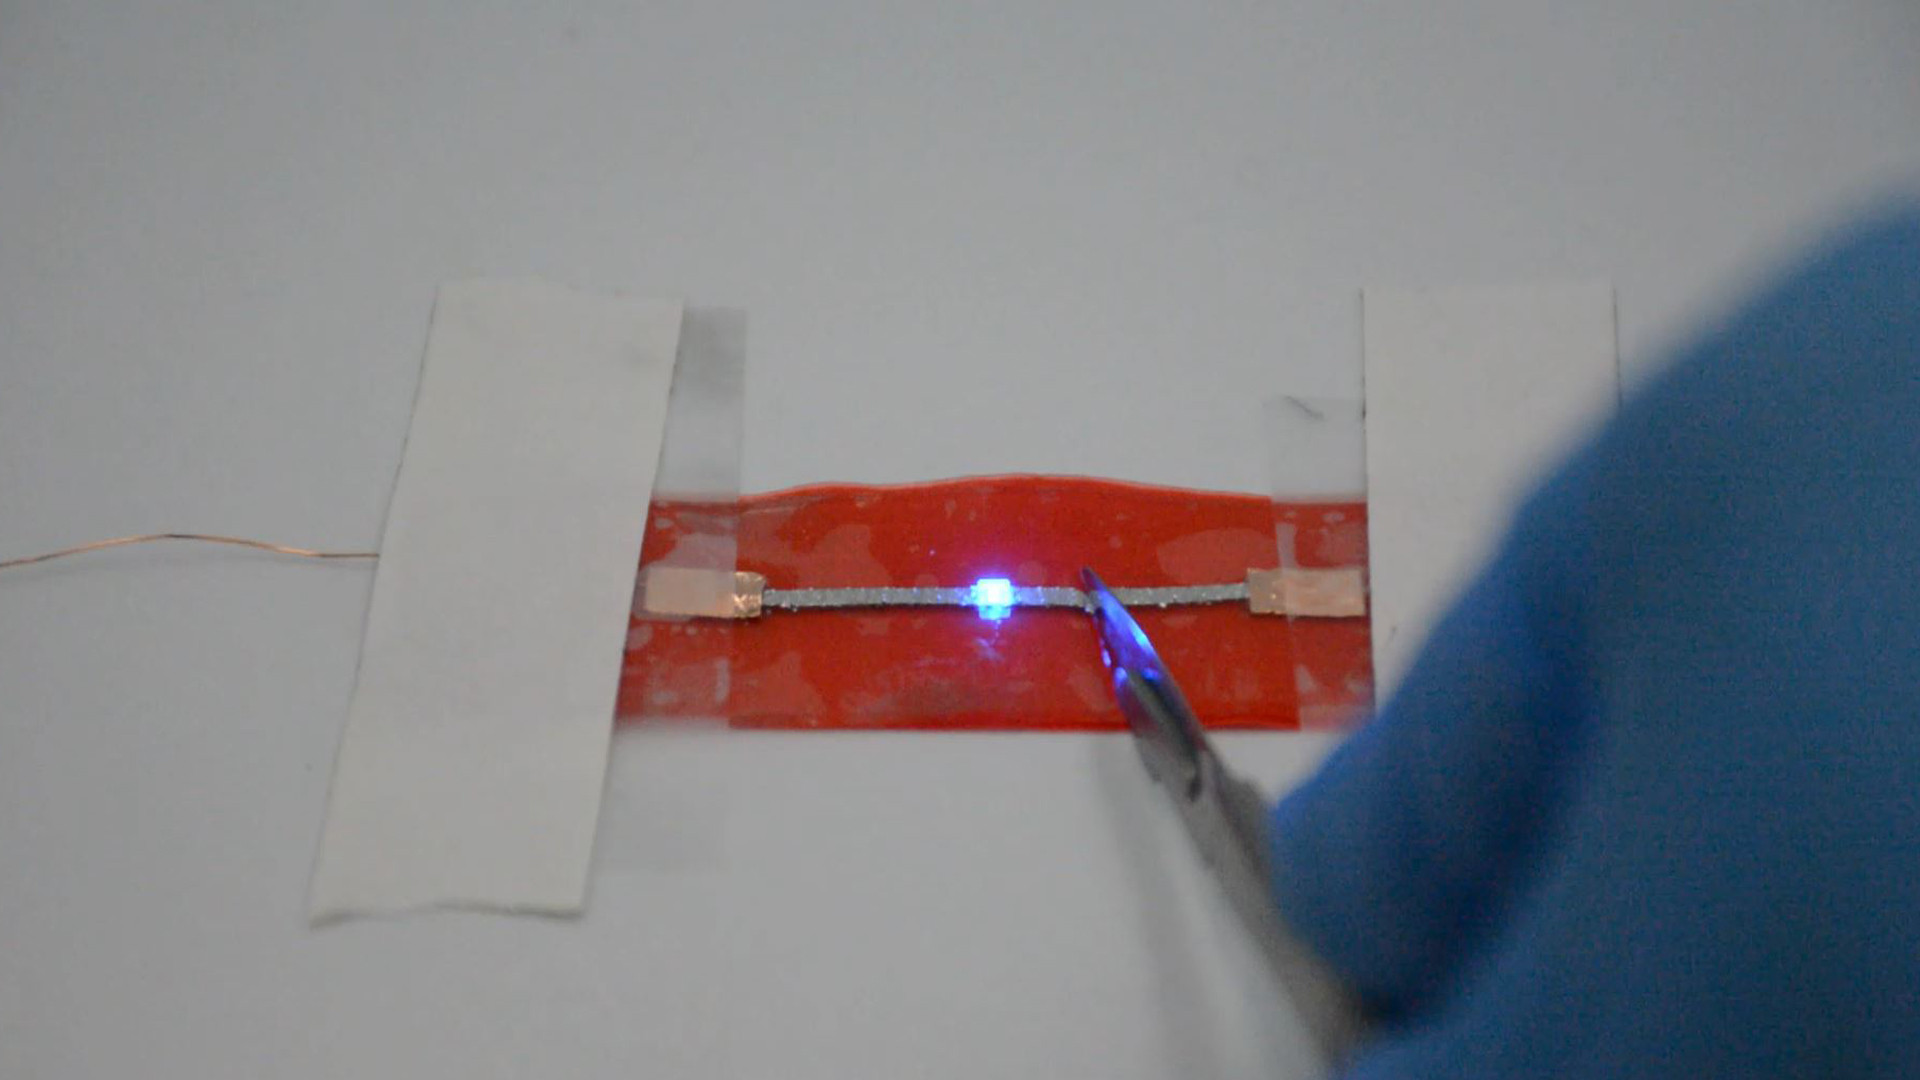 Image: The conductive and stretchable ‘super-material’ can heal cracks or cuts almost instantaneously (Photo courtesy of NUS)